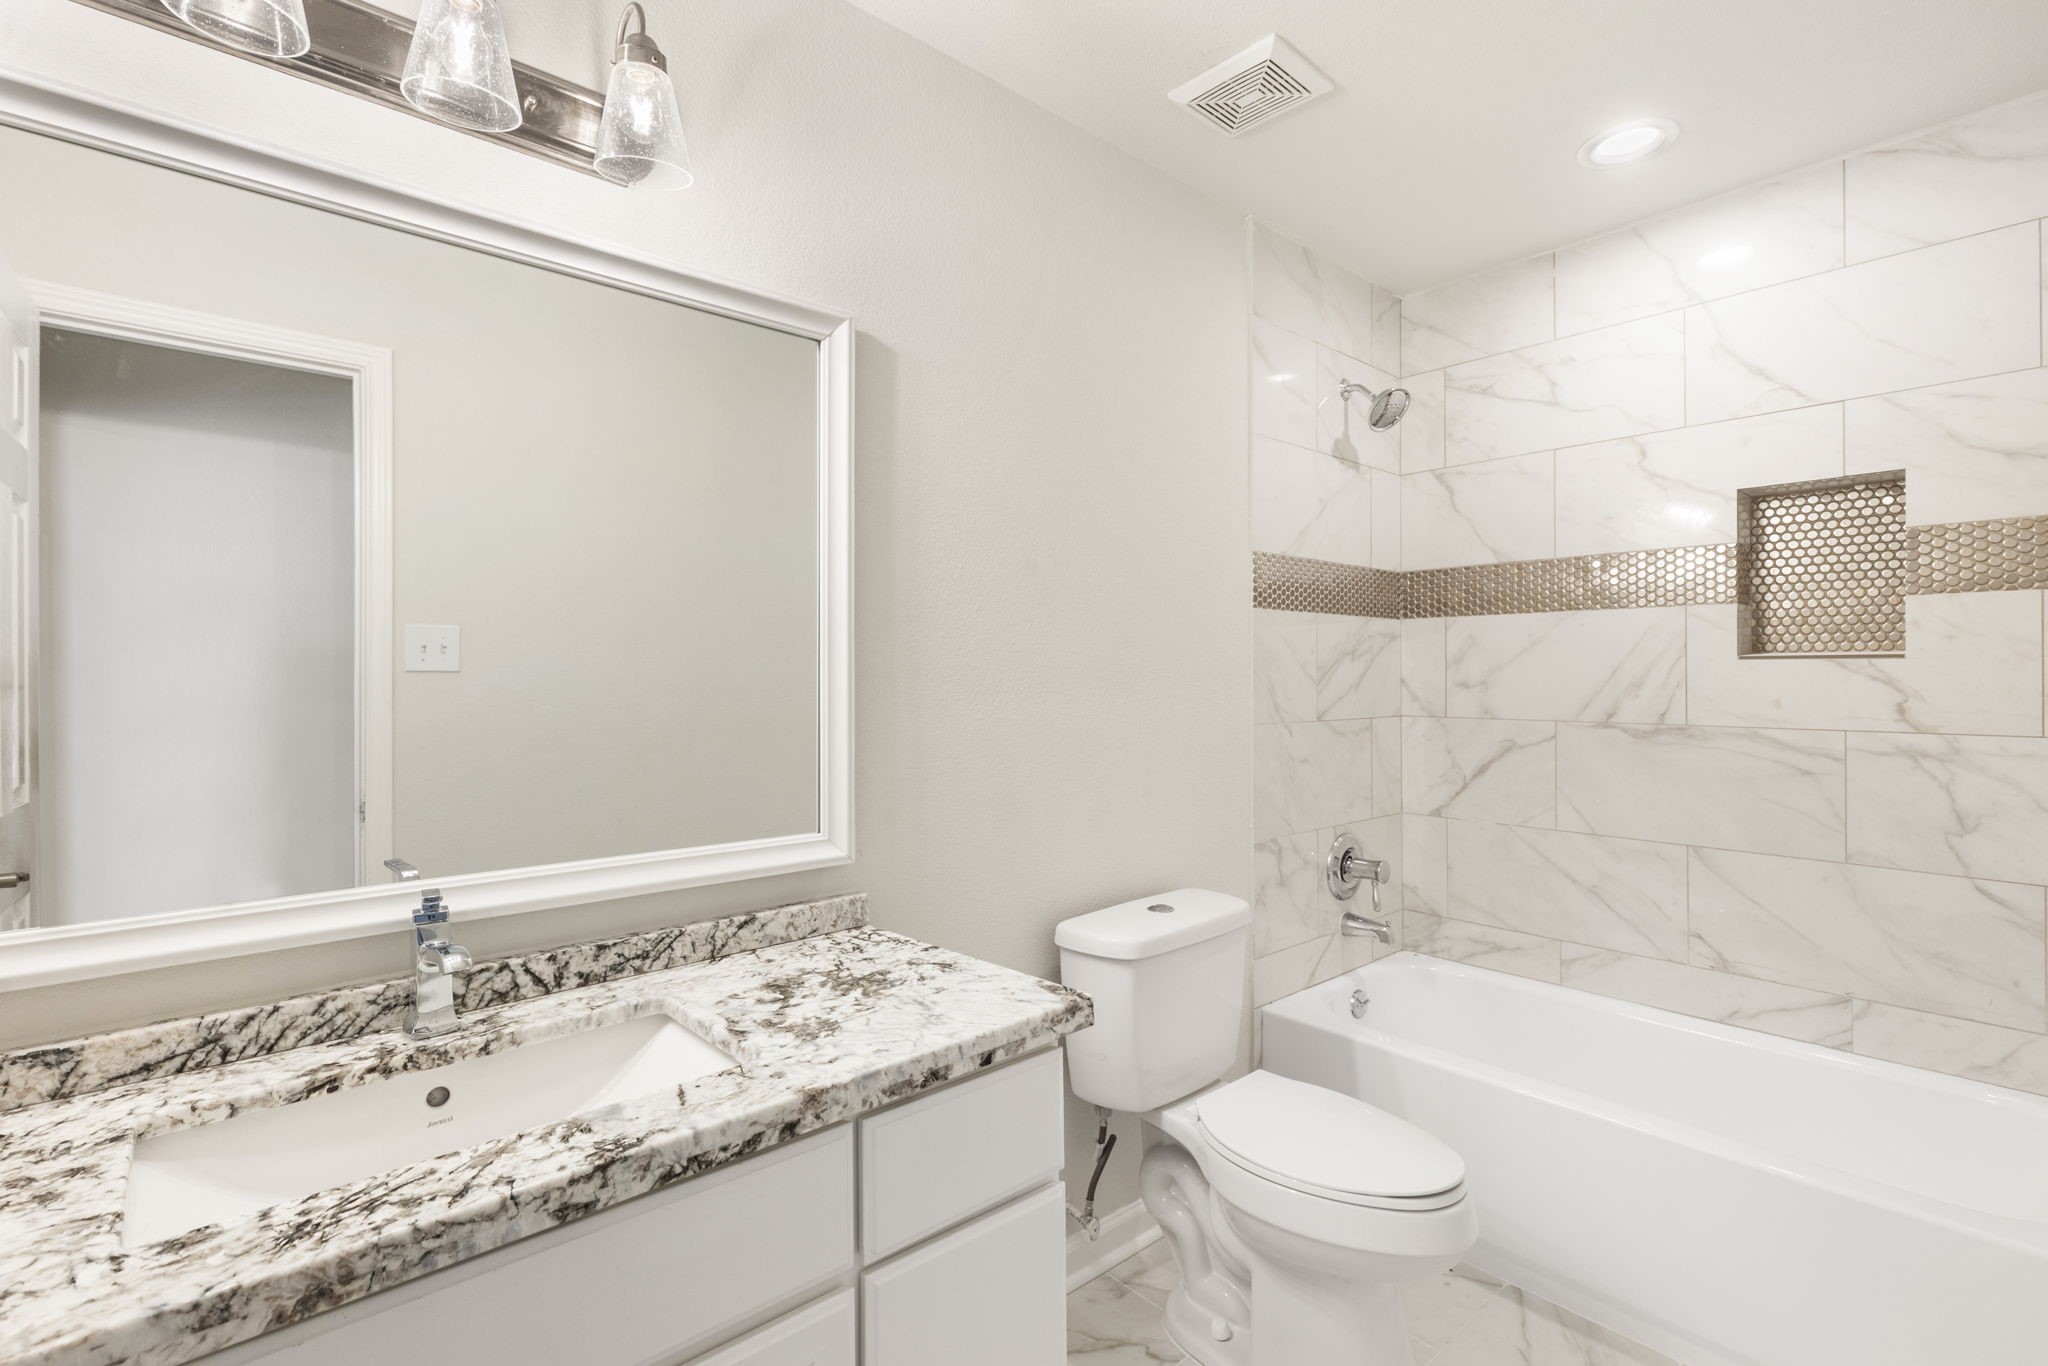 The full bath has access from the hall and is situated between two secondary bedrooms. The bathroom boasts granite counters, white cabinetry, framed mirror, shower/tub combination with tile surround.